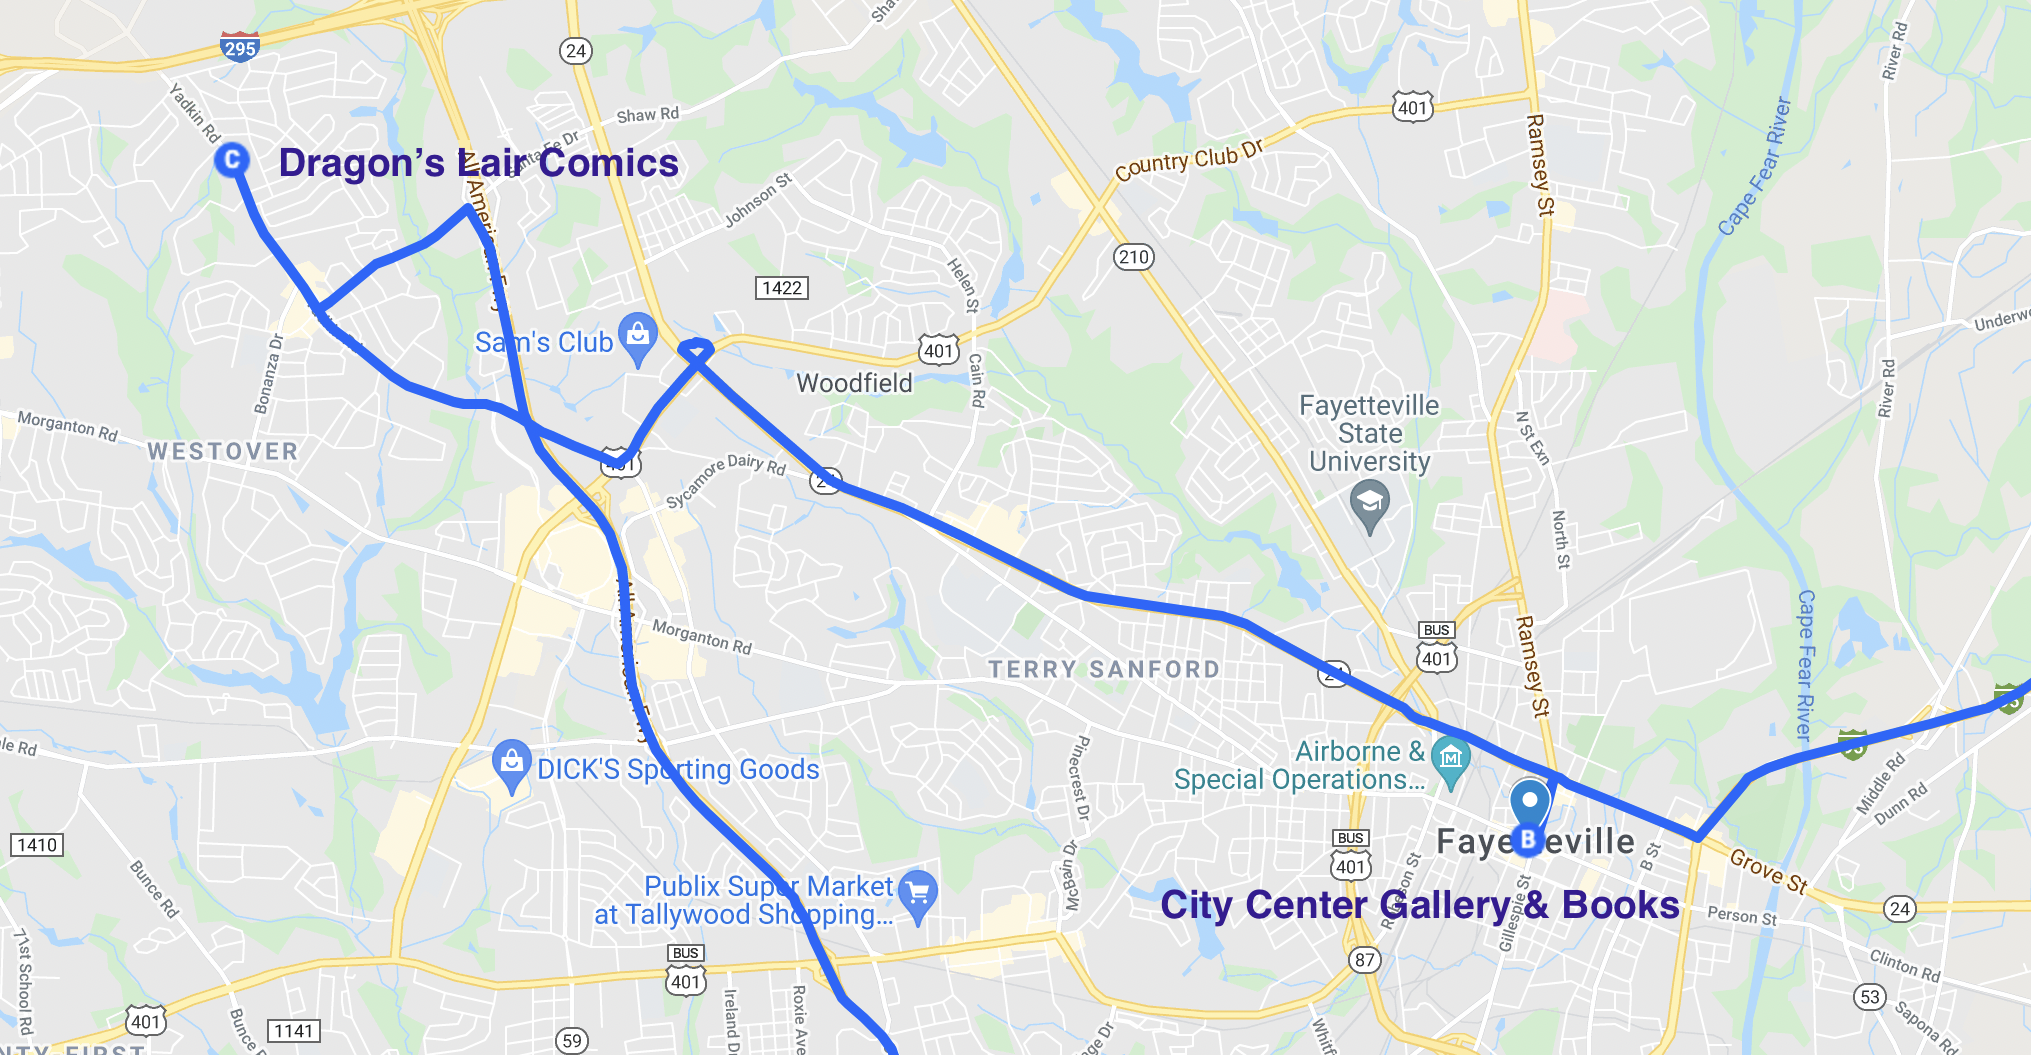 road trip map of literary spots in fayetteville north carolina